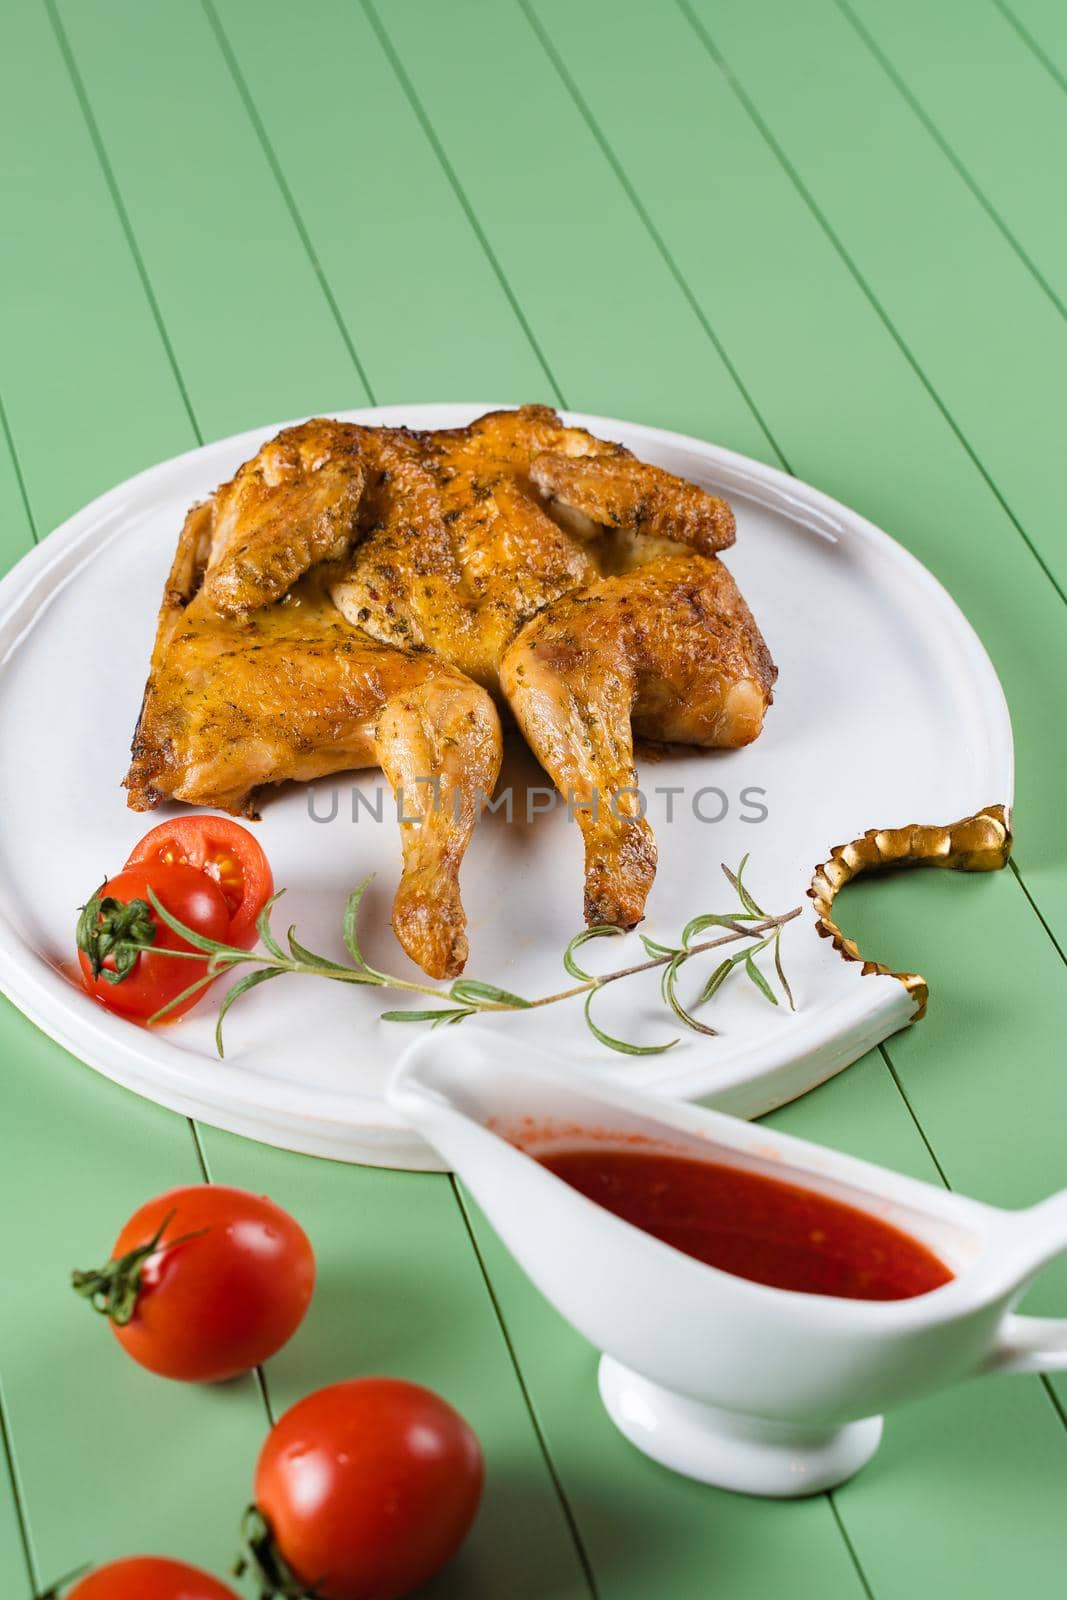 Chicken tobacco with tomato sauce, rosemary and tomatoes on a beautiful white plate on a green background. Grilled chicken by Rabizo